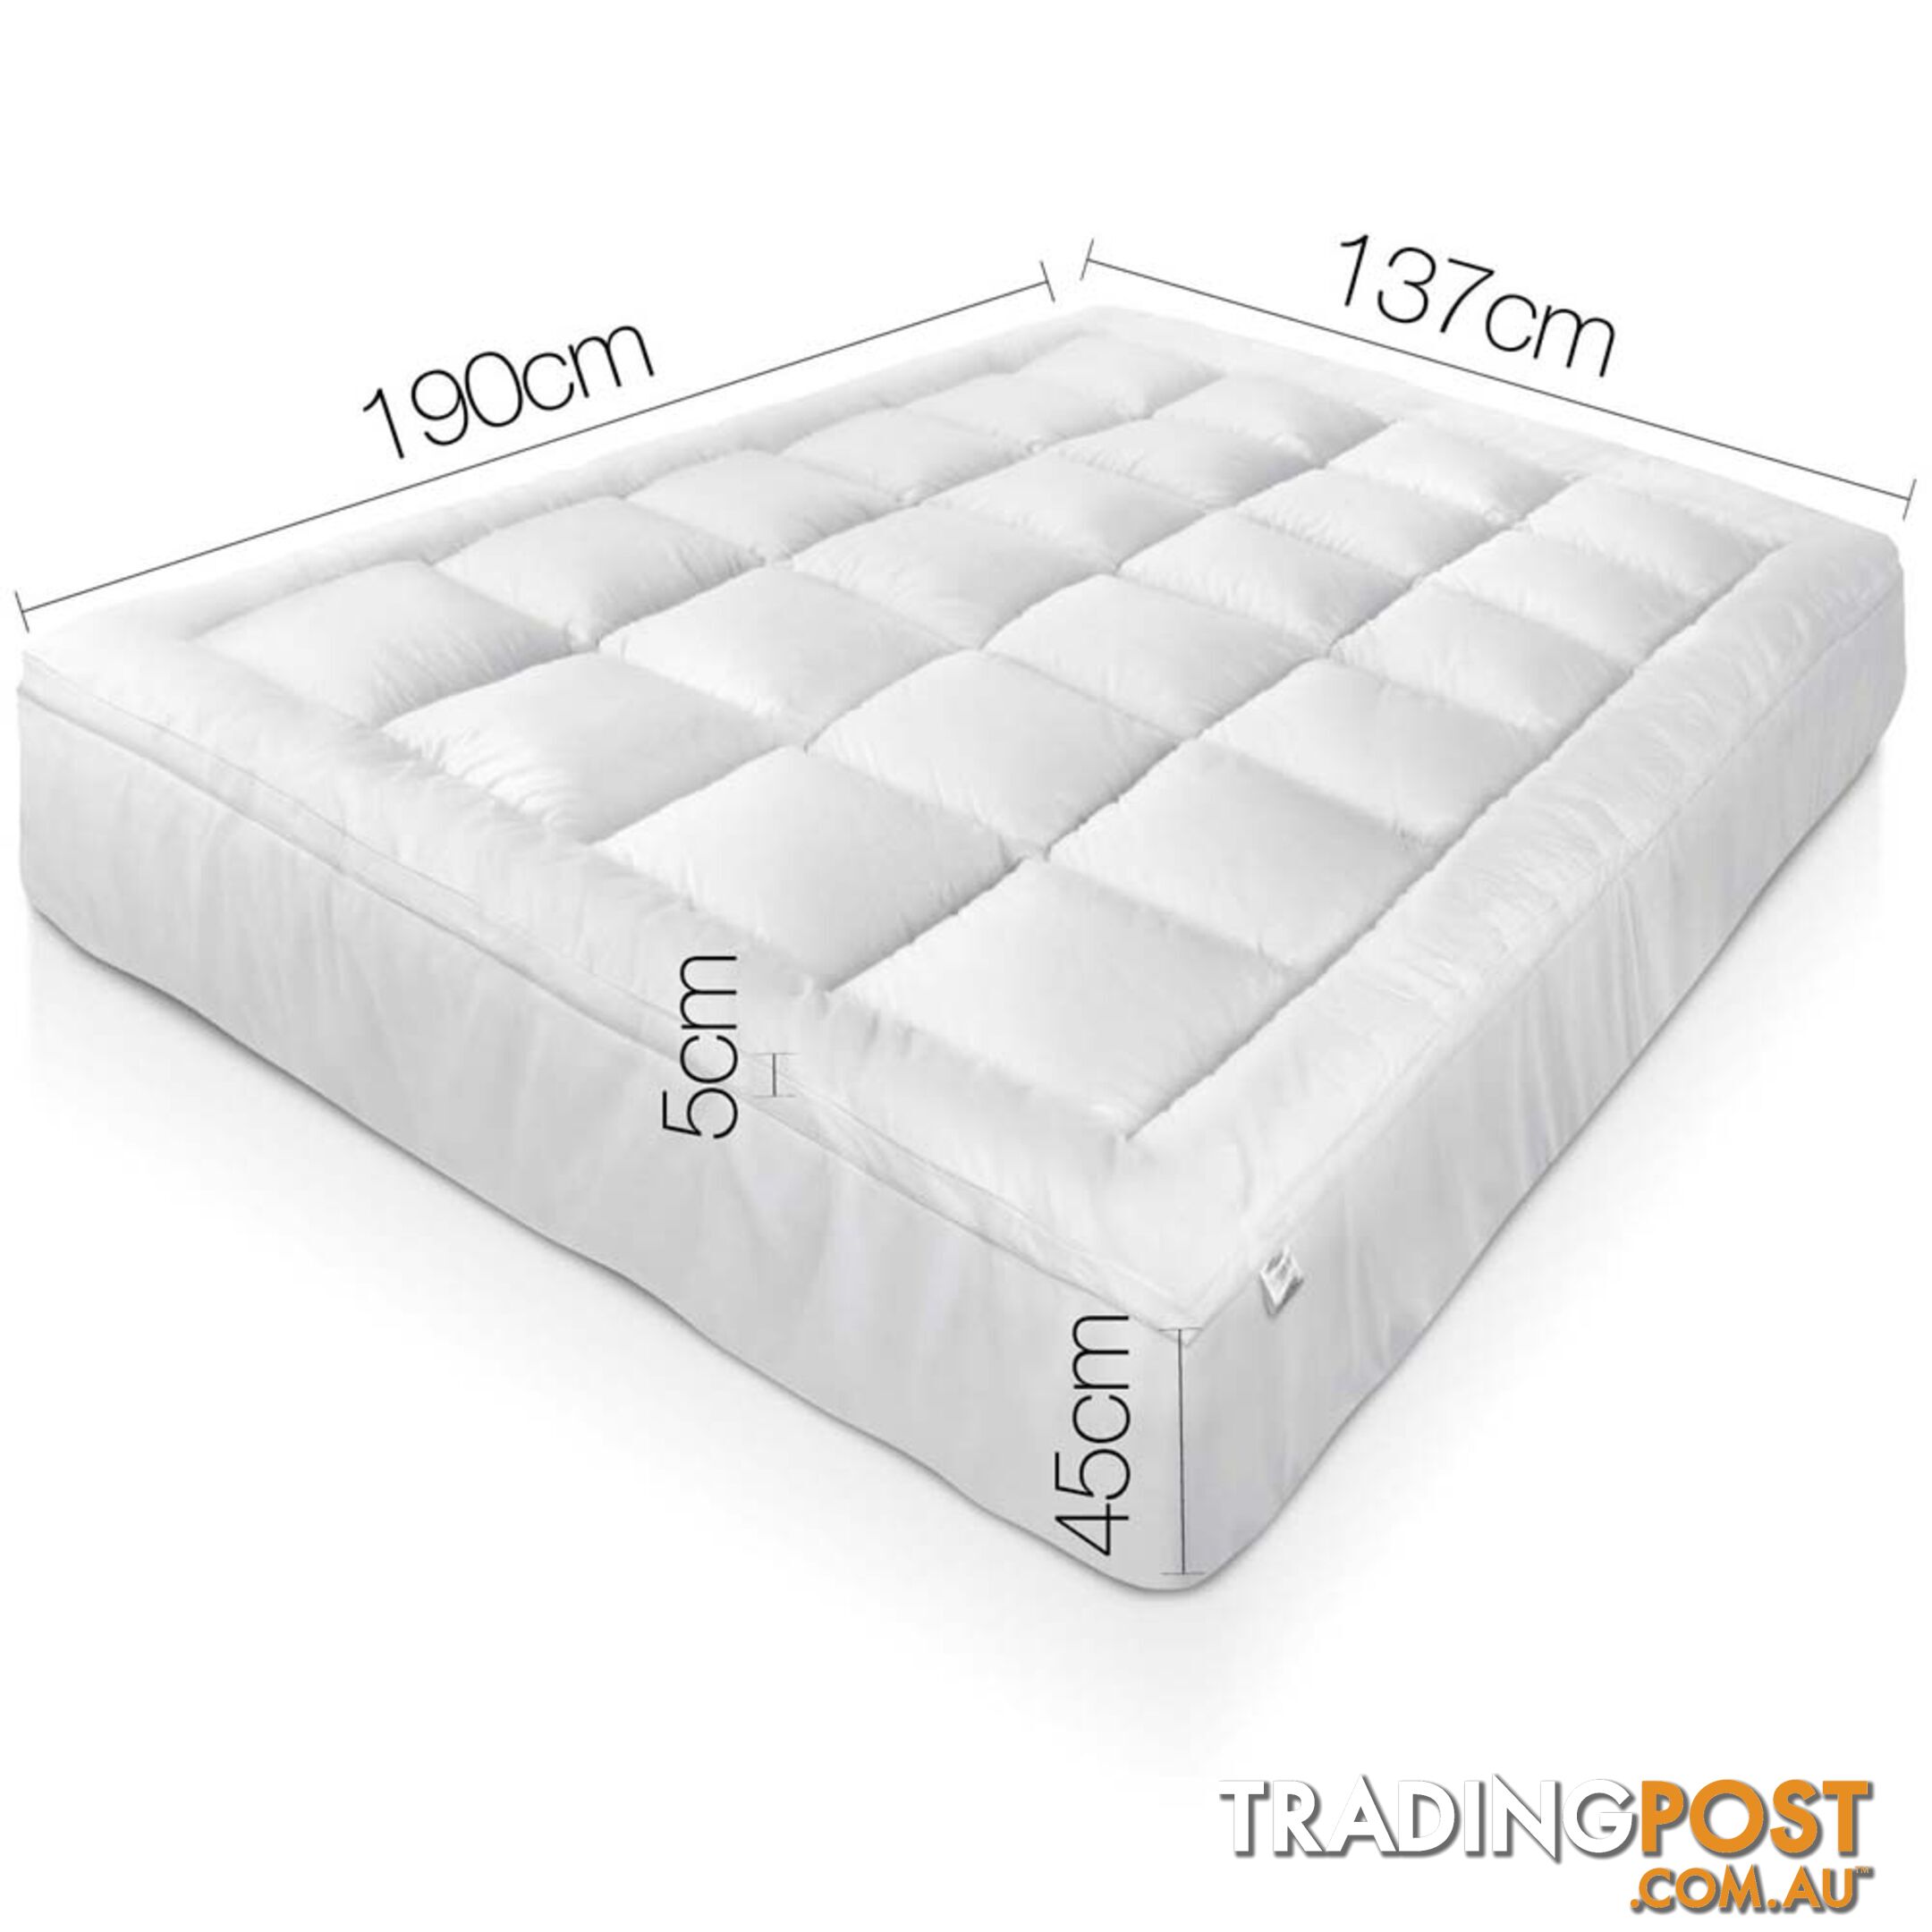 1000GSM Bamboo Fabric Pillowtop Mattress Topper Bed Cover Protector 5cm Double